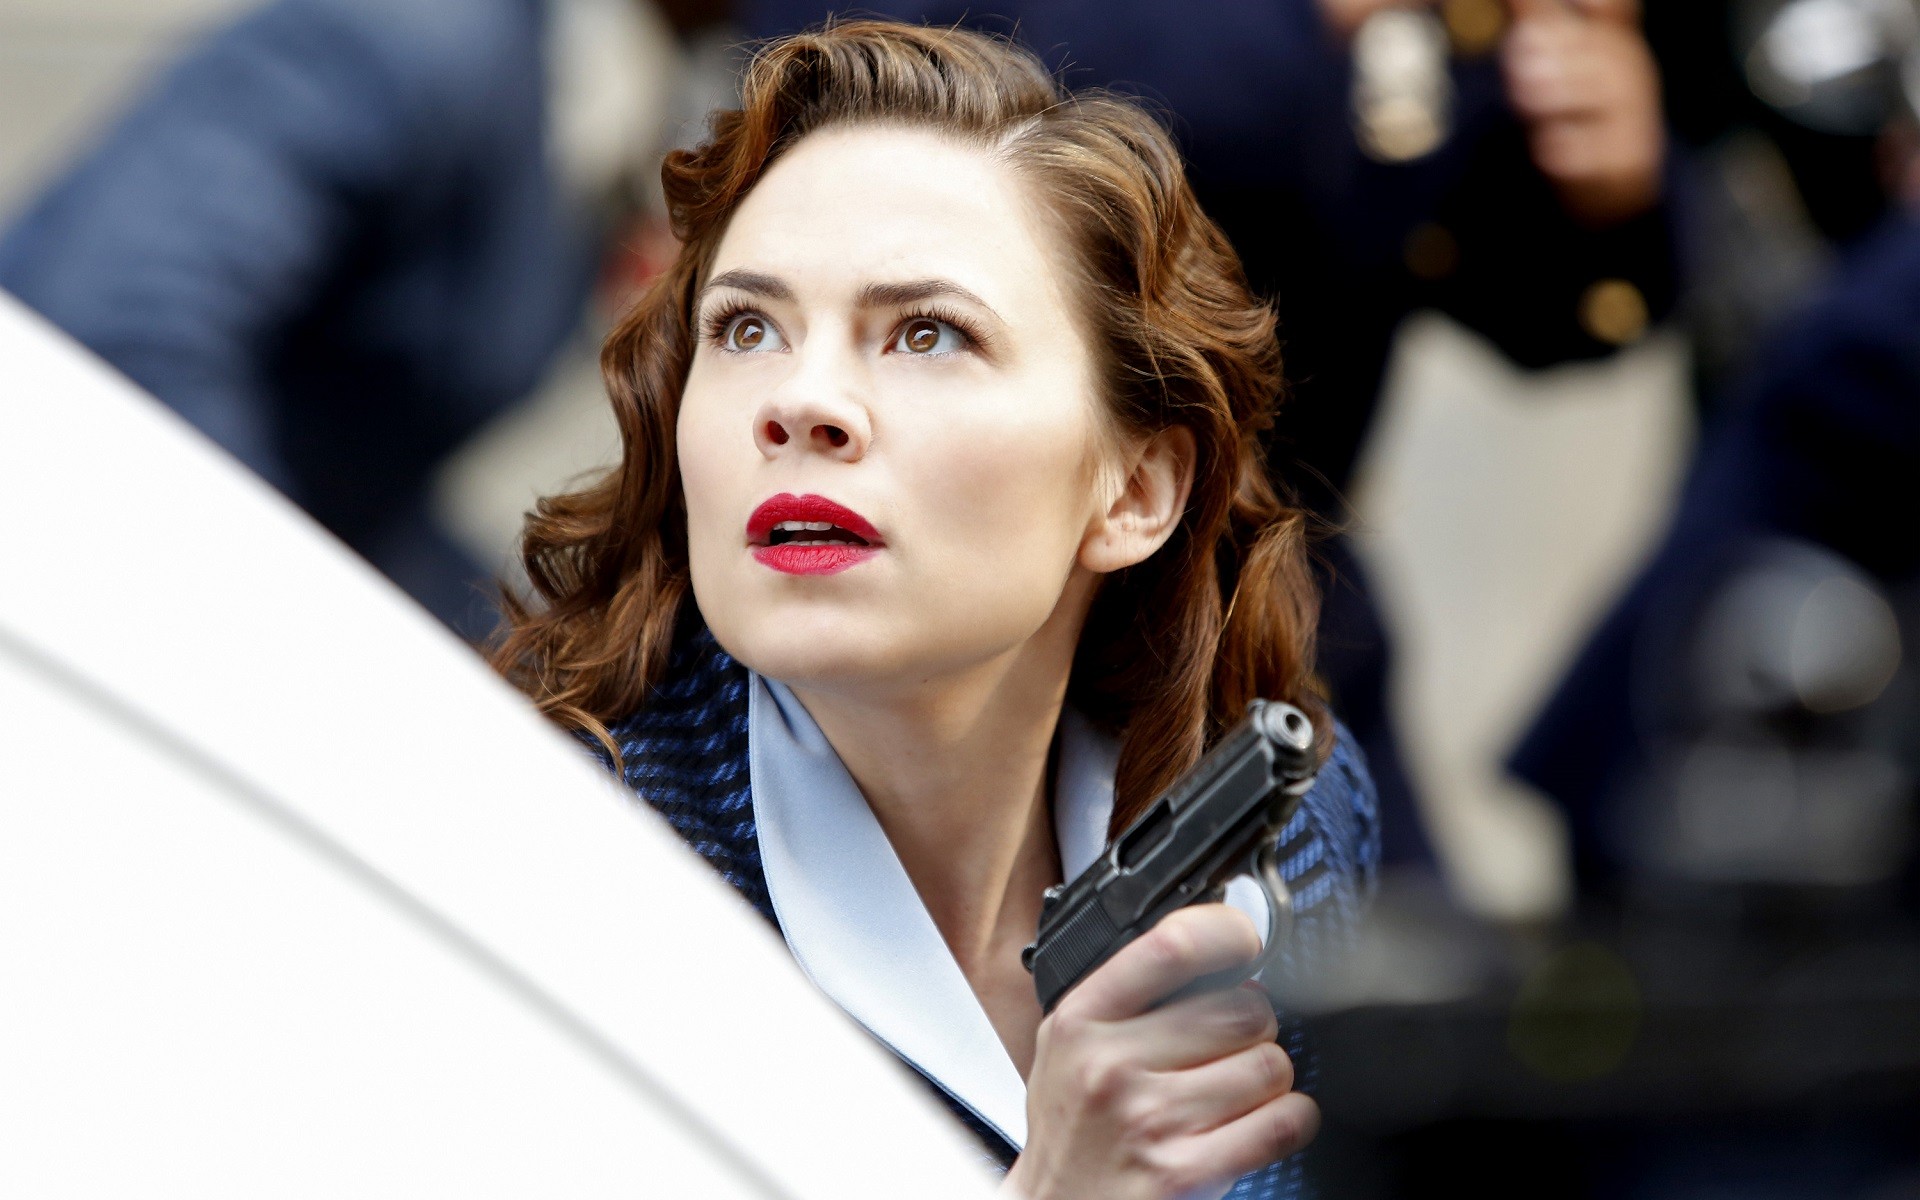 Peggy Carter Hayley Atwell Women Actress Red Lipstick Gun Pistol Weapon Face Movies Captain America  1920x1200